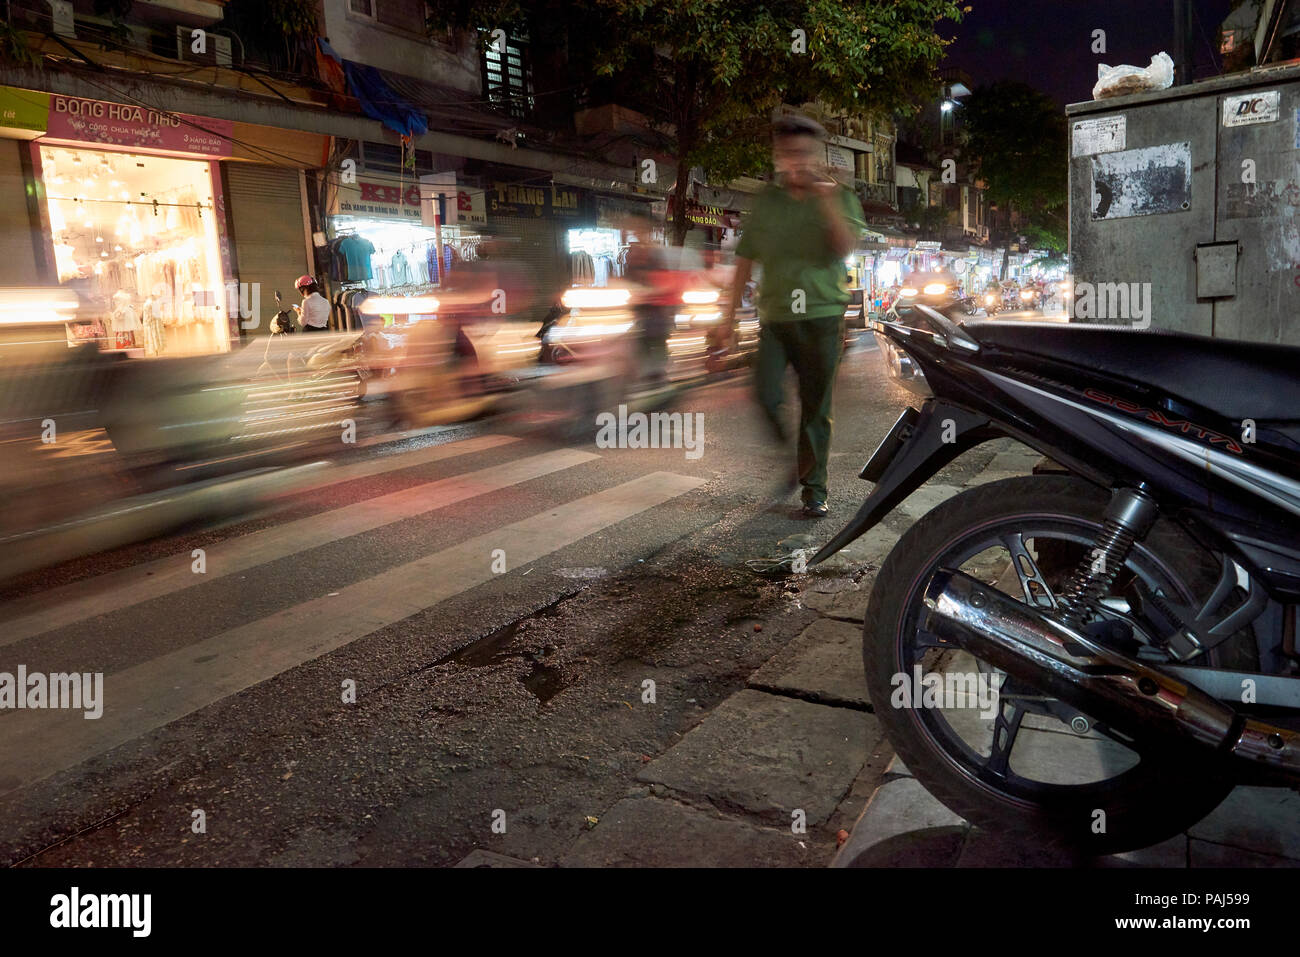 A motion blurred man walks next to busy traffic at night at the streets of Hanoi's Old Quarter, Vietnam, framed by a parked motorbike in the foregroun Stock Photo